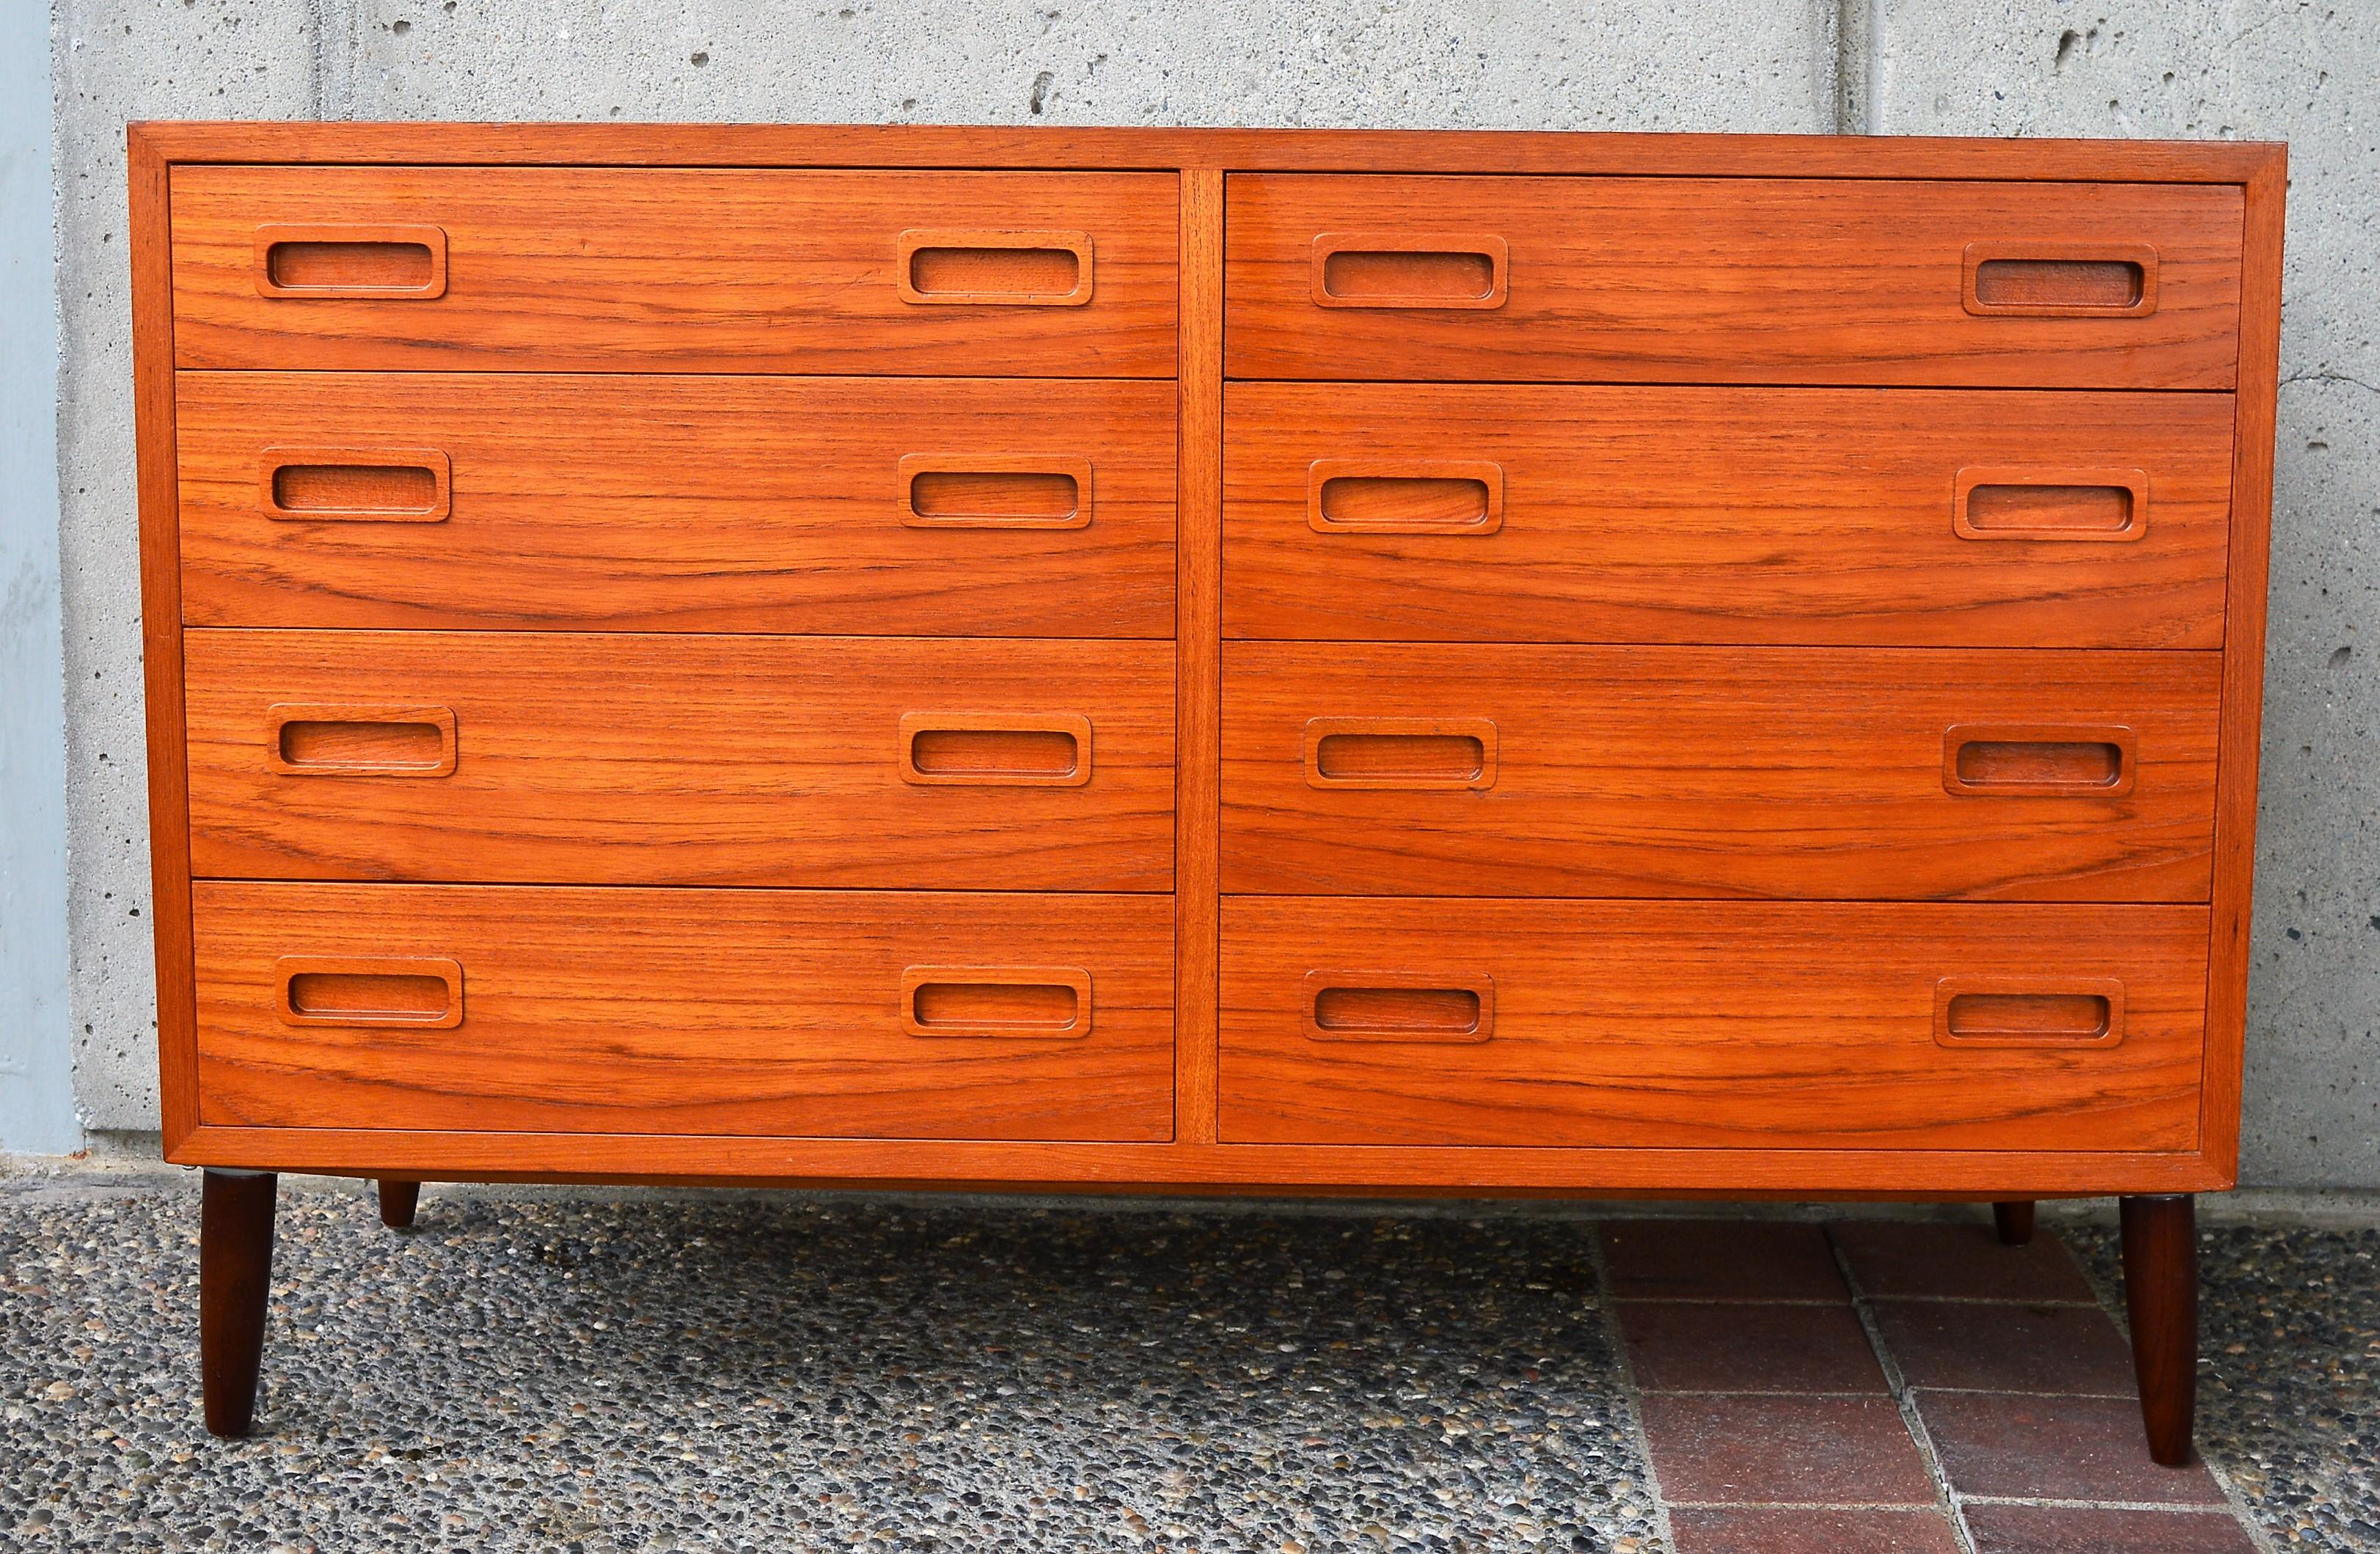 Quality Danish Teak Compact Dresser/Chest of Drawers with Legs by Hundevad & Co For Sale 1